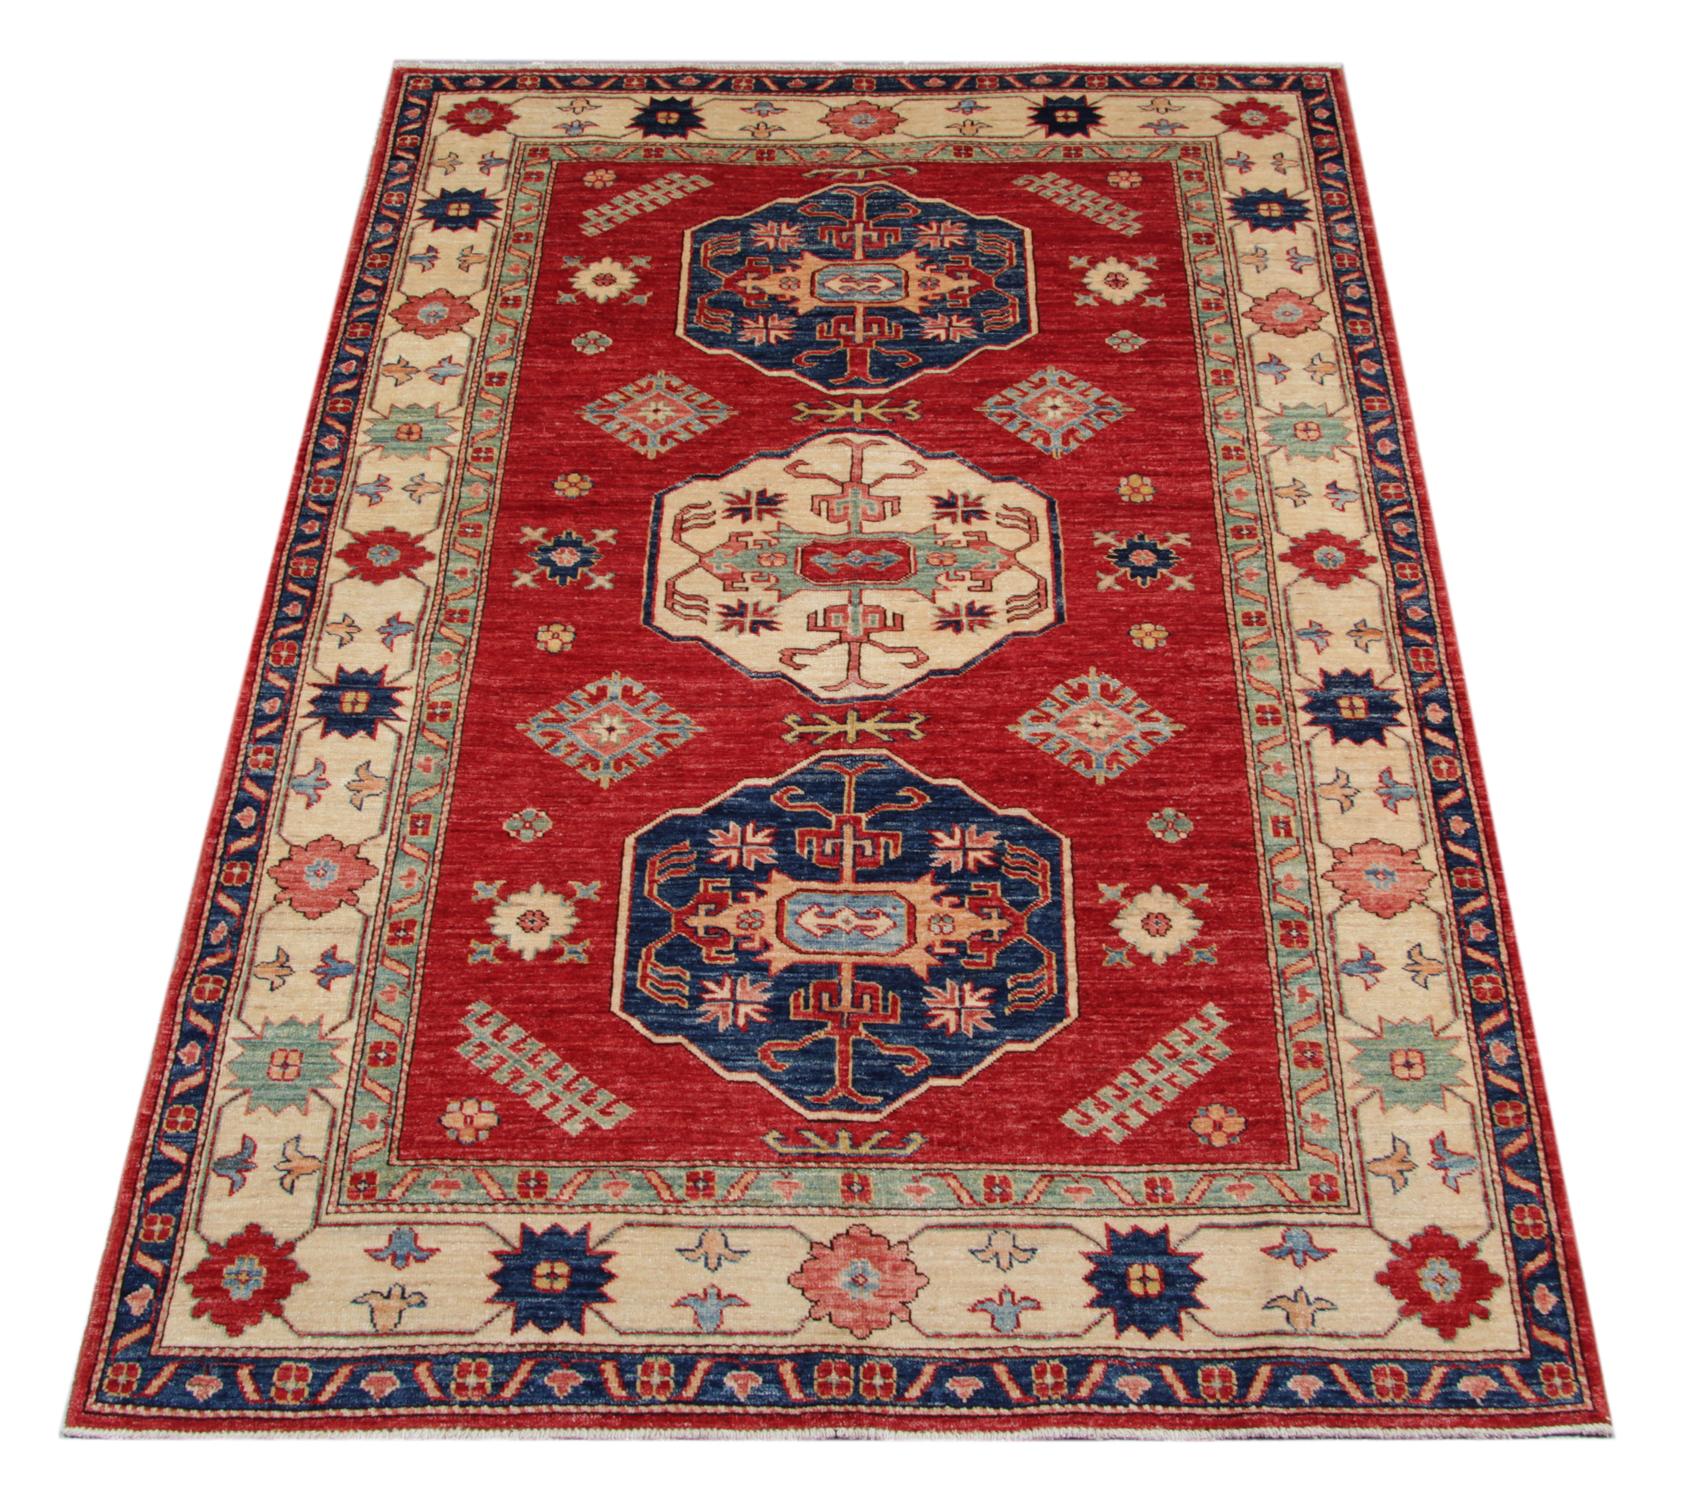 A beautiful new traditional Afghan Kazak rug features a conventional tribal medallion design woven in beige, blue and green accents through the centre on a red field. The design is then finished with a highly-detailed repeat pattern border that